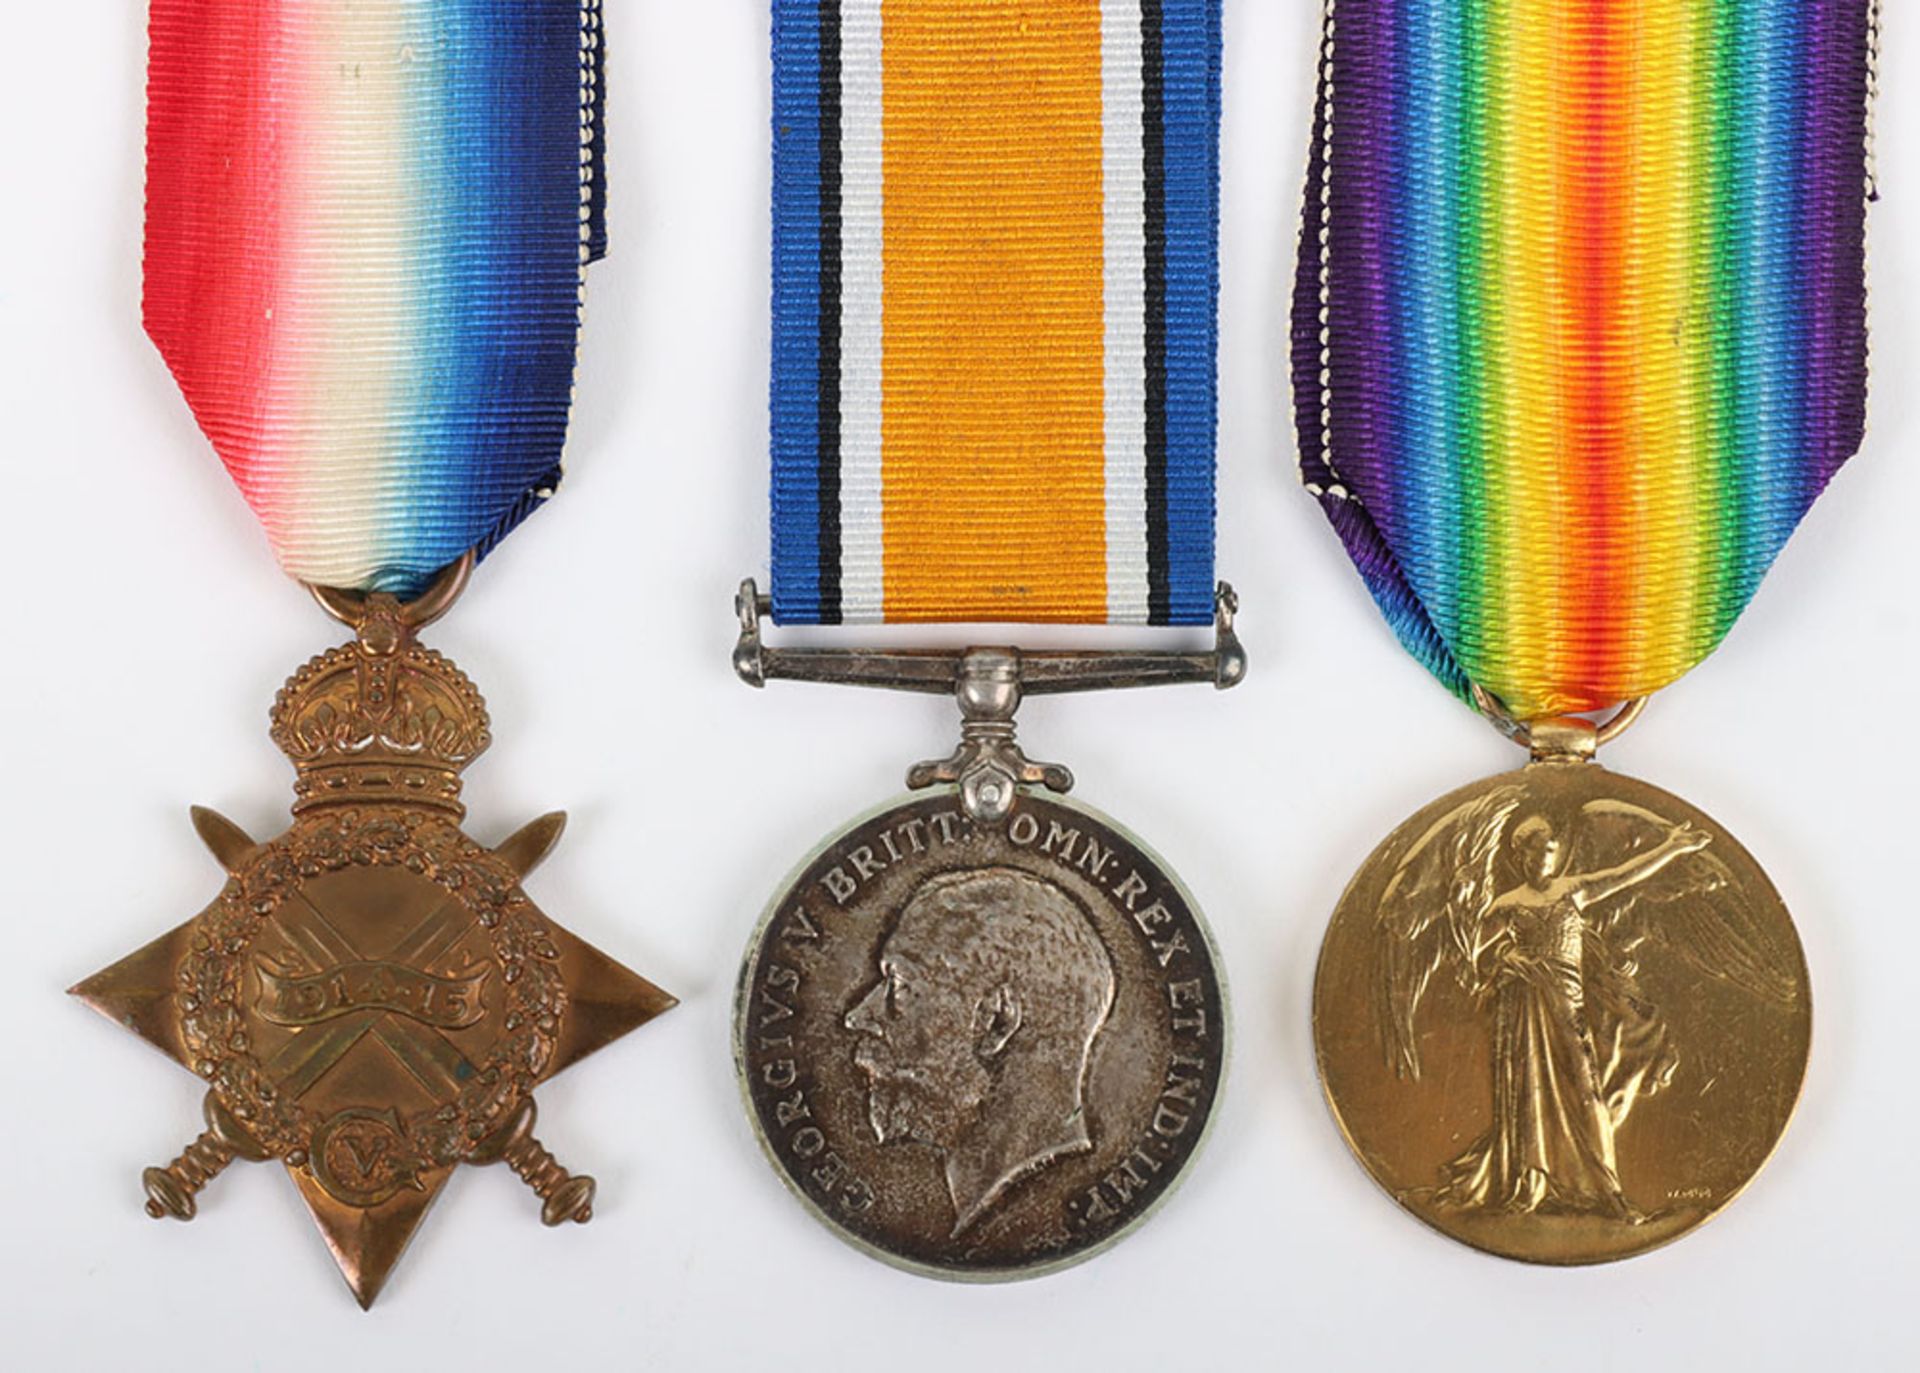 Great War 1914-15 Star Medal Trio to the 18th Battalion Durham Light Infantry